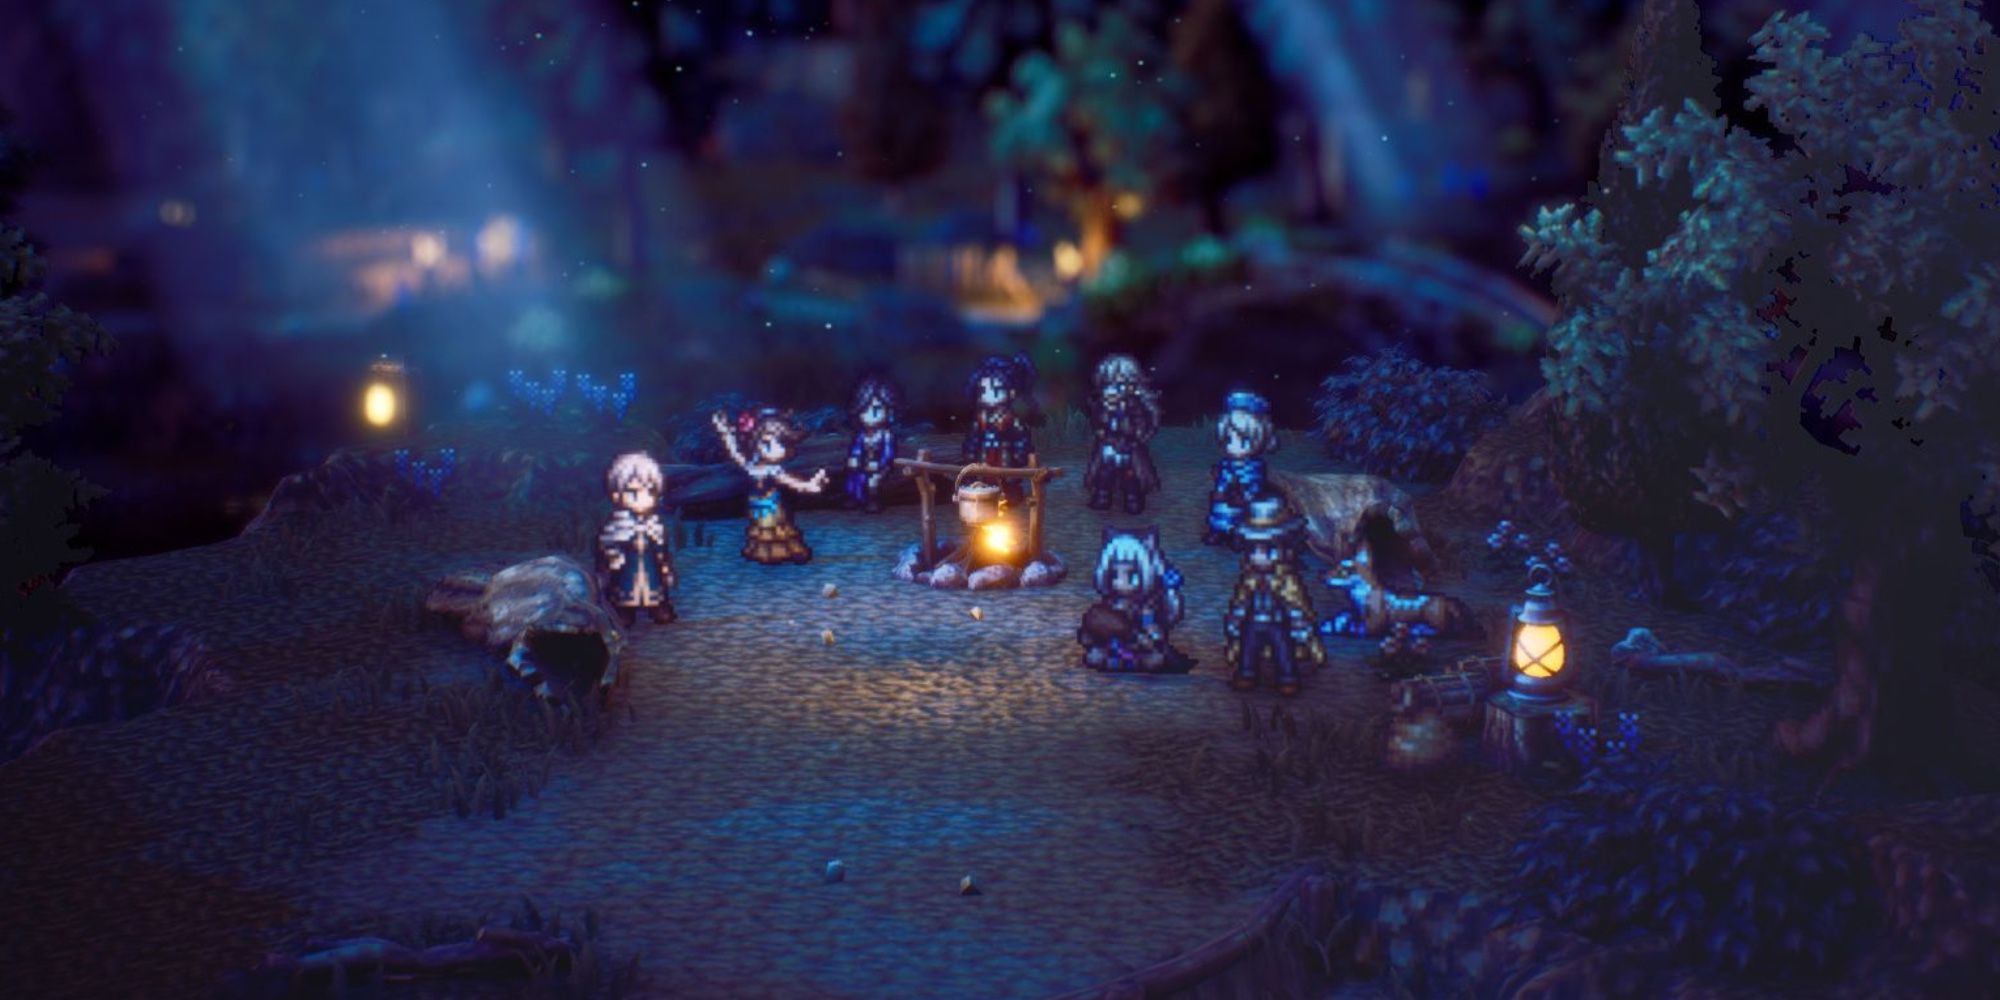 Devs not ready to commit to Octopath Traveler III